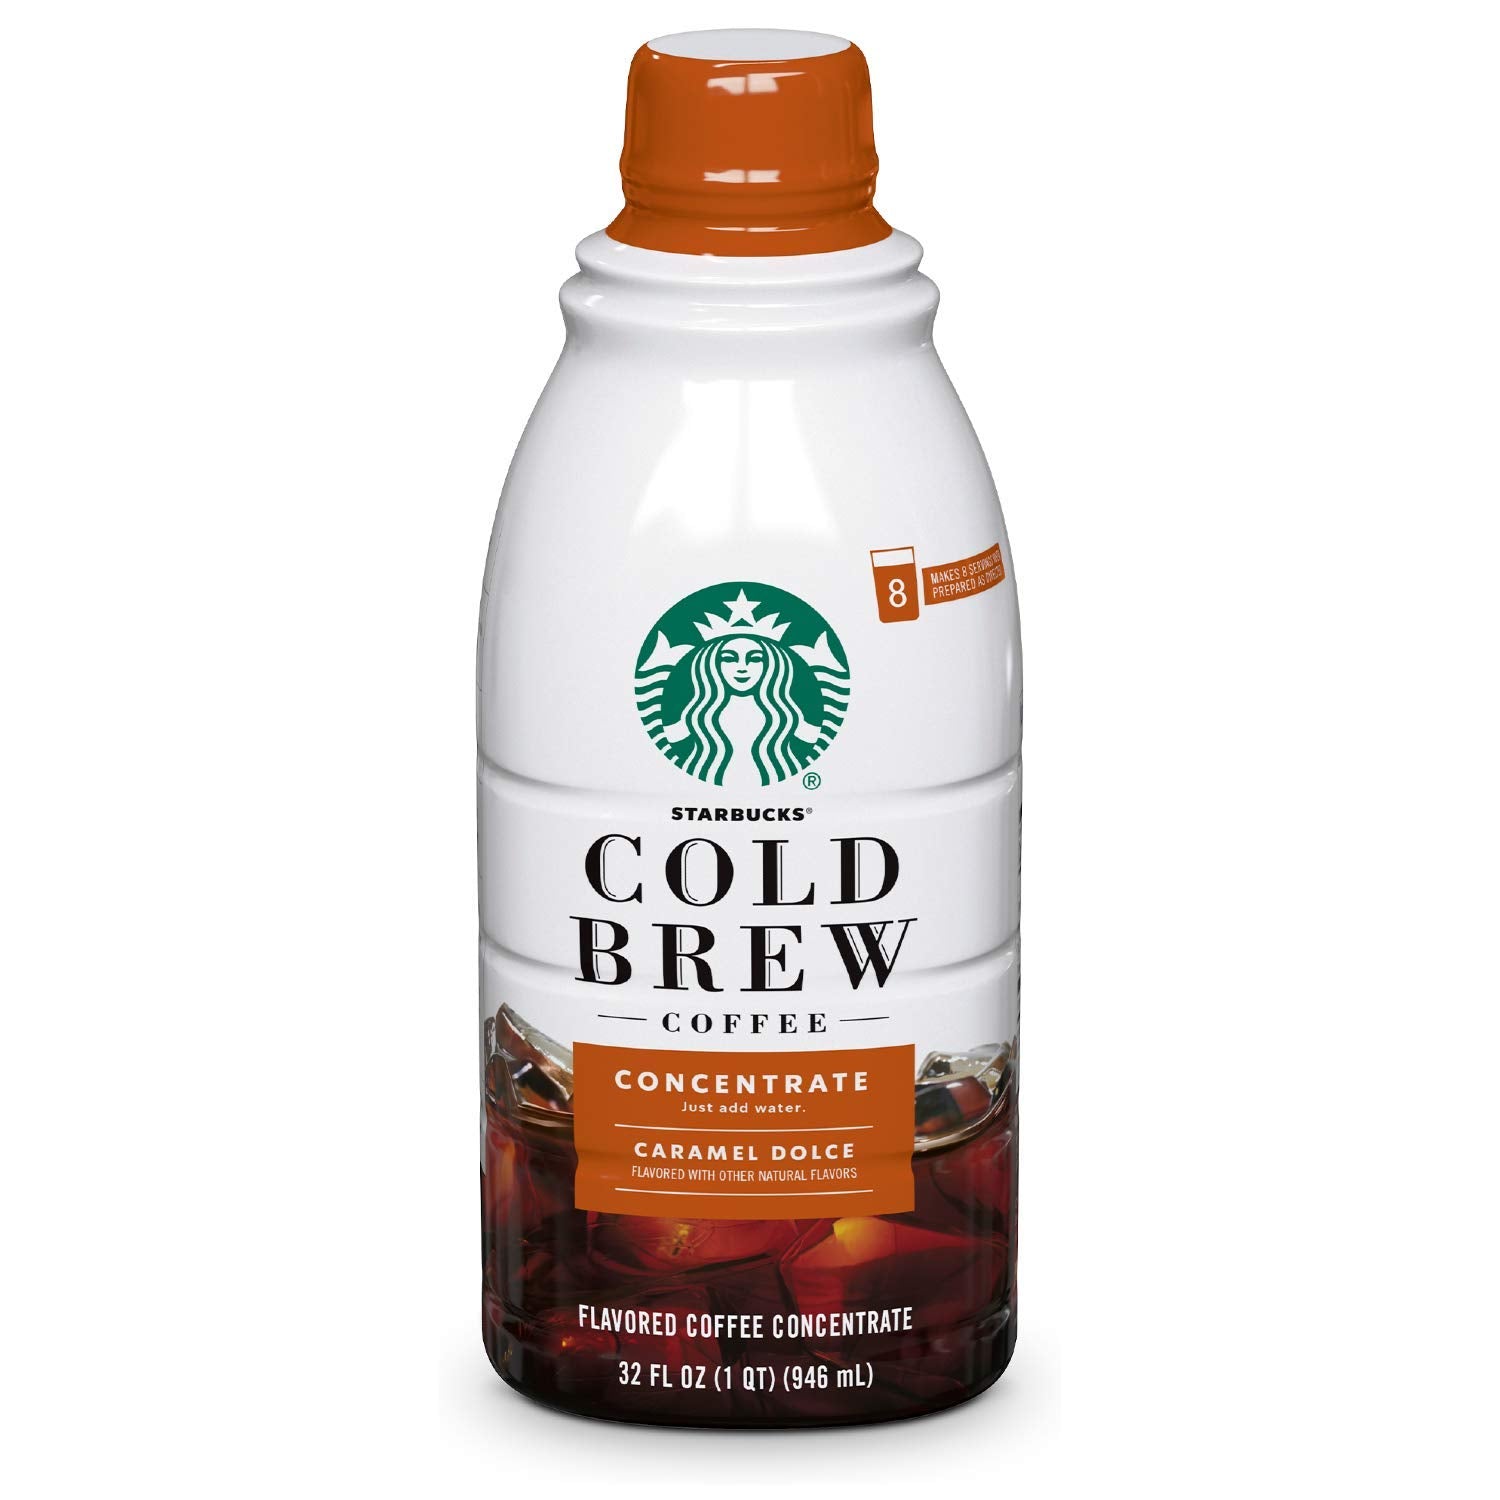 Starbucks Cold Brew Coffee — Caramel Dolce Flavored — Multi-Serve Concentrate — 1 bottle (32 oz.)